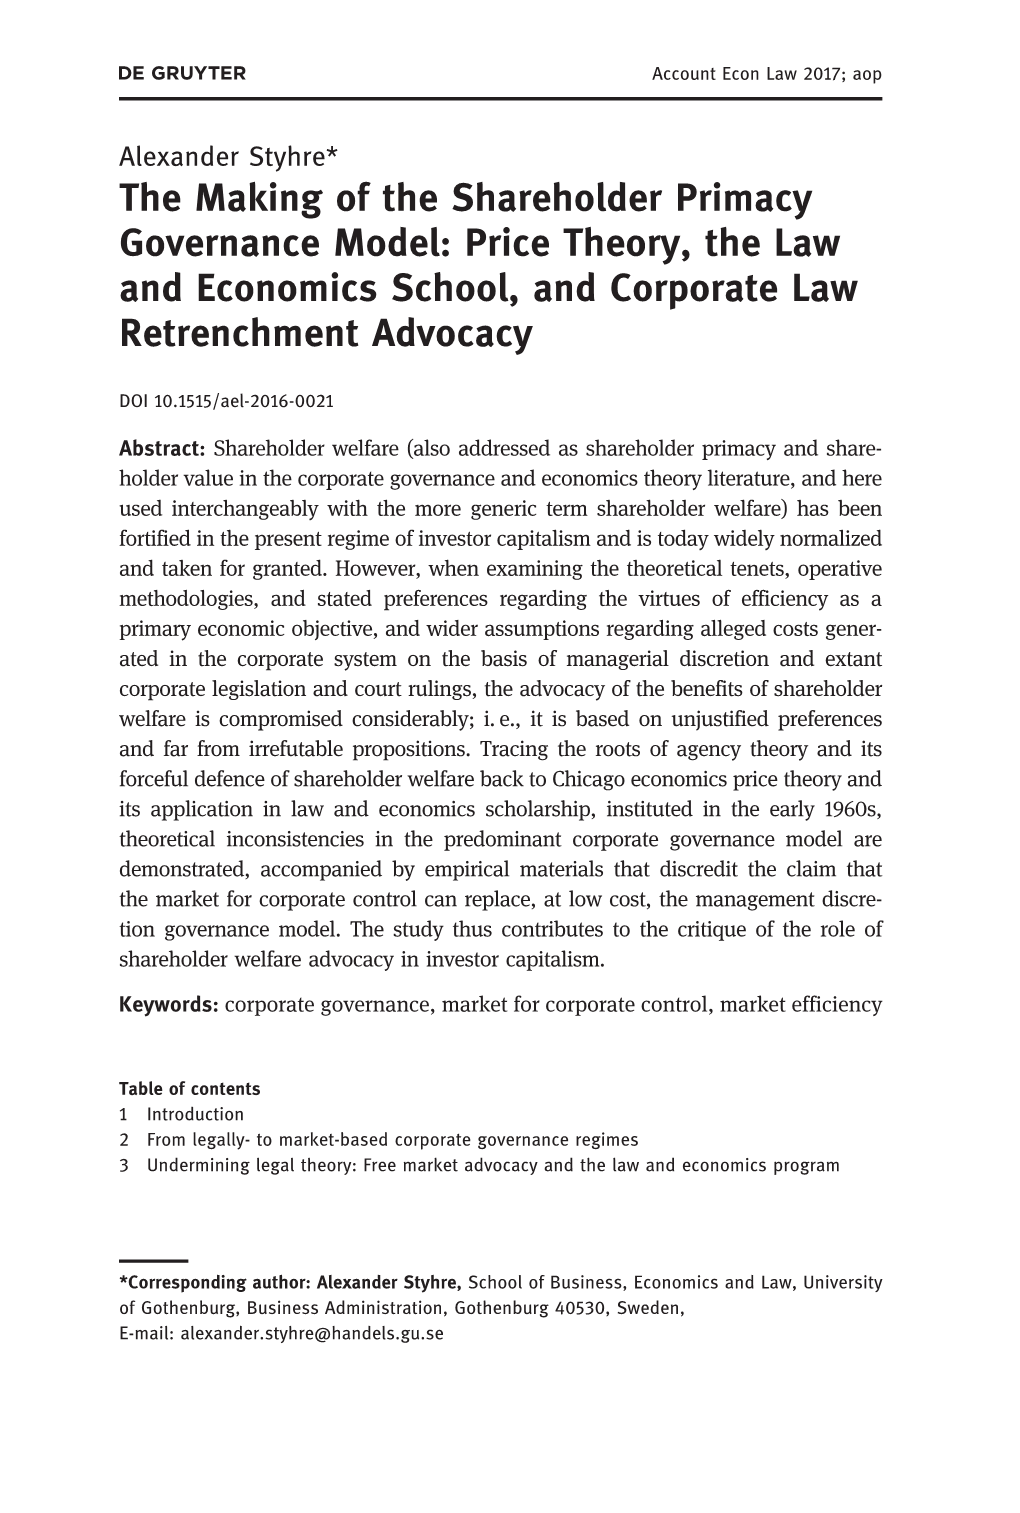 Price Theory, the Law and Economics School, and Corporate Law Retrenchment Advocacy